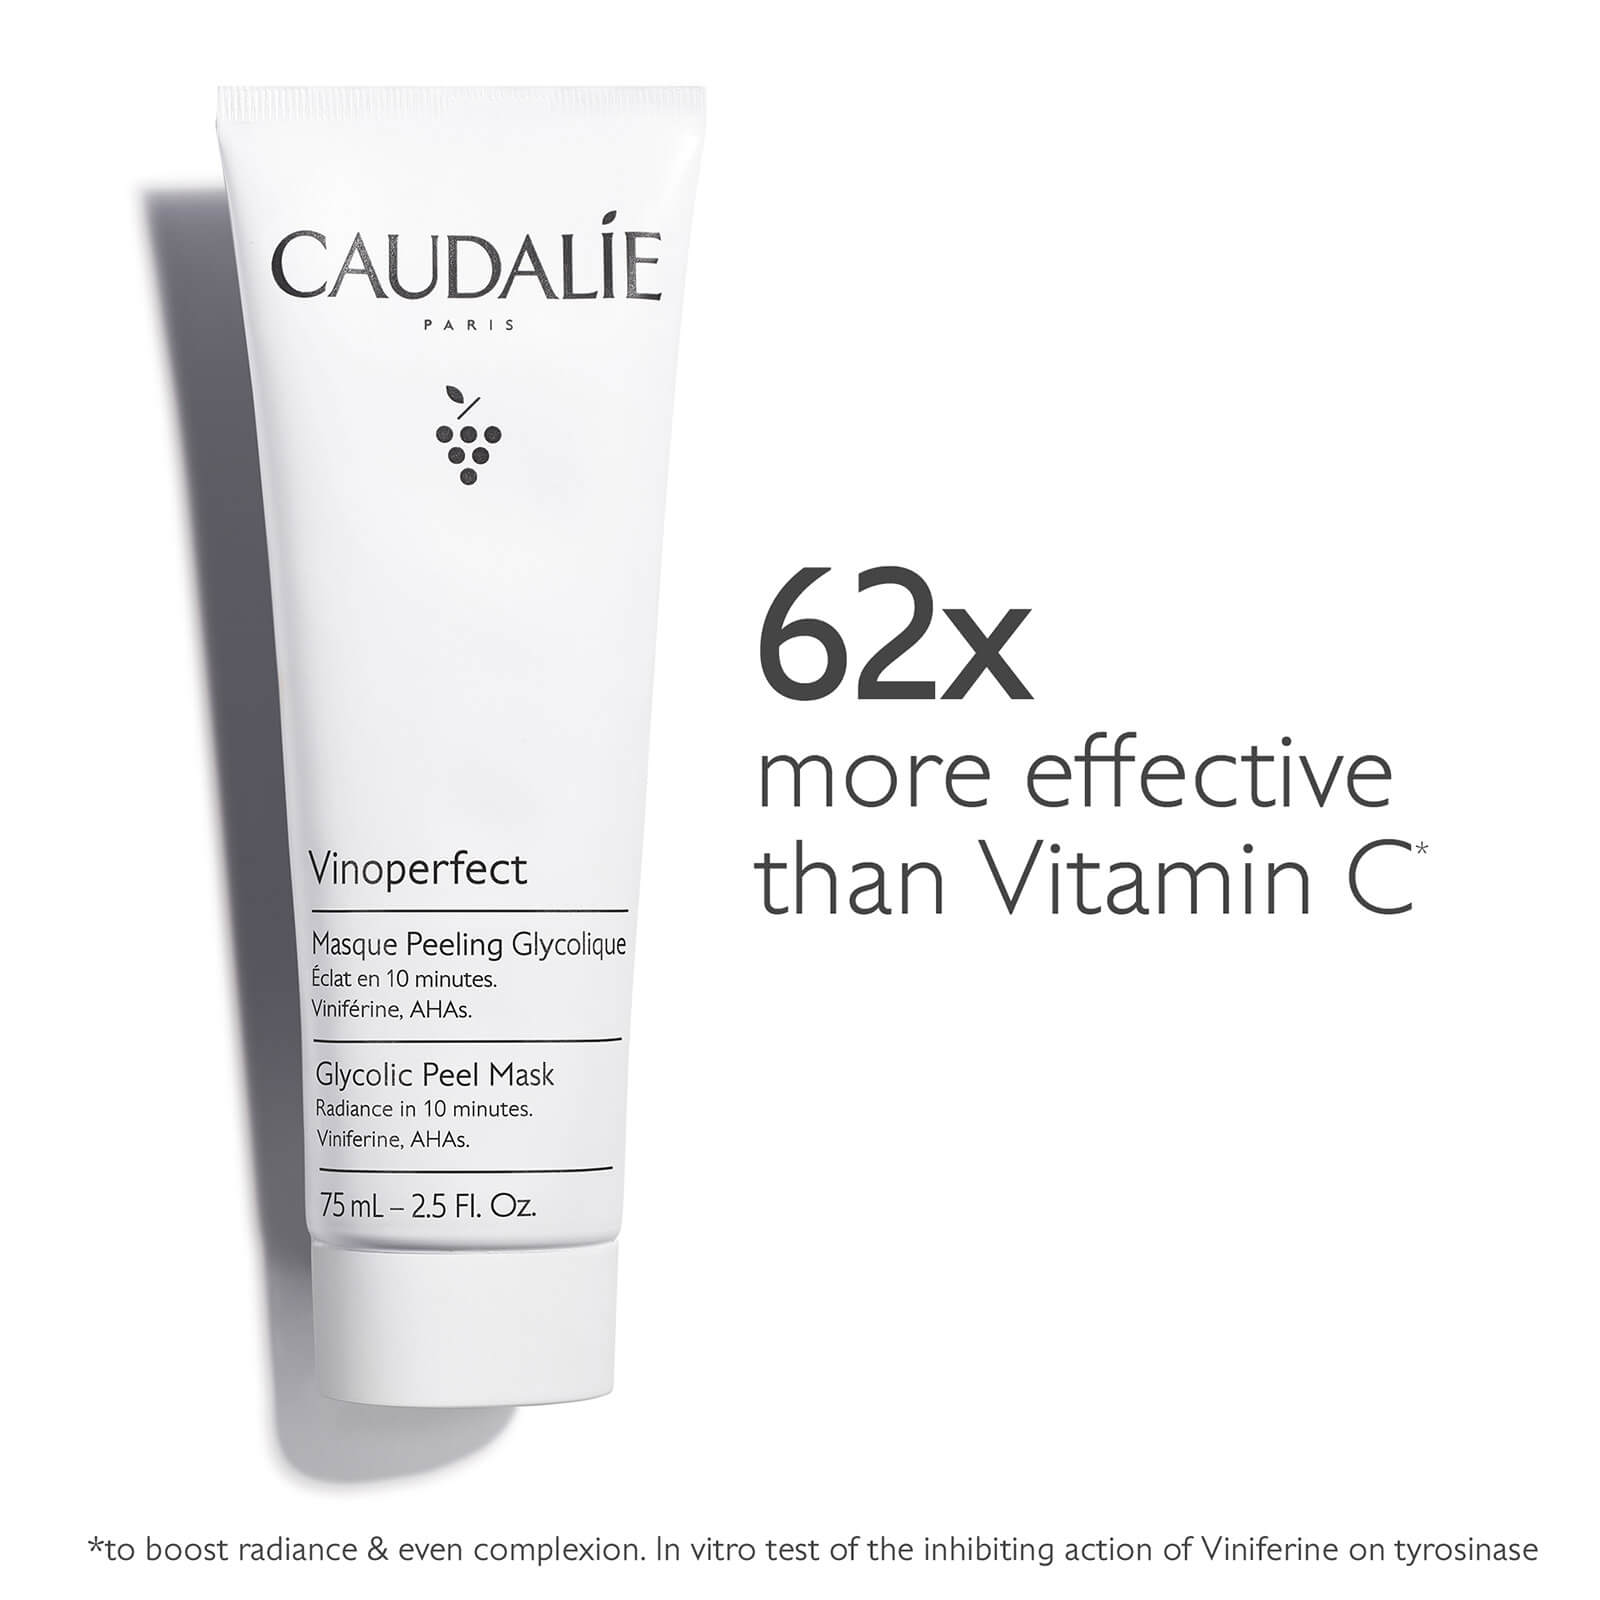 62x more effective than Vitamin C, *to boost radiance & even complexion. In vitro test of the inhibiting action of Viniferine on tyrosinase